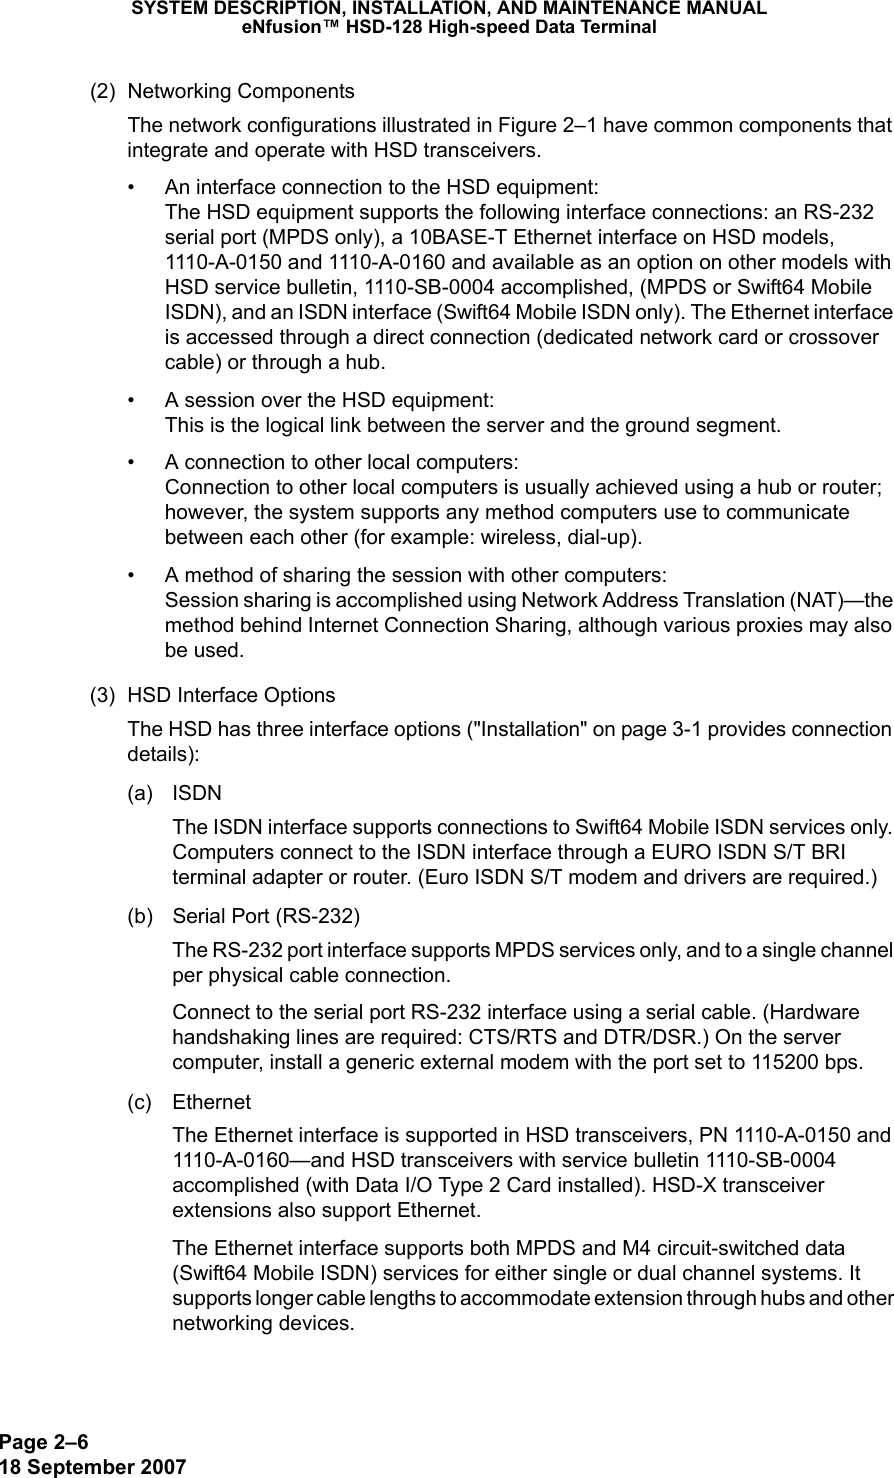 Page 2–618 September 2007SYSTEM DESCRIPTION, INSTALLATION, AND MAINTENANCE MANUALeNfusion™ HSD-128 High-speed Data Terminal(2) Networking ComponentsThe network configurations illustrated in Figure 2–1 have common components that integrate and operate with HSD transceivers.• An interface connection to the HSD equipment: The HSD equipment supports the following interface connections: an RS-232 serial port (MPDS only), a 10BASE-T Ethernet interface on HSD models, 1110-A-0150 and 1110-A-0160 and available as an option on other models with HSD service bulletin, 1110-SB-0004 accomplished, (MPDS or Swift64 Mobile ISDN), and an ISDN interface (Swift64 Mobile ISDN only). The Ethernet interface is accessed through a direct connection (dedicated network card or crossover cable) or through a hub.• A session over the HSD equipment: This is the logical link between the server and the ground segment.• A connection to other local computers: Connection to other local computers is usually achieved using a hub or router; however, the system supports any method computers use to communicate between each other (for example: wireless, dial-up).• A method of sharing the session with other computers: Session sharing is accomplished using Network Address Translation (NAT)—the method behind Internet Connection Sharing, although various proxies may also be used.(3) HSD Interface OptionsThe HSD has three interface options (&quot;Installation&quot; on page 3-1 provides connection details):(a) ISDNThe ISDN interface supports connections to Swift64 Mobile ISDN services only. Computers connect to the ISDN interface through a EURO ISDN S/T BRI terminal adapter or router. (Euro ISDN S/T modem and drivers are required.)(b) Serial Port (RS-232)The RS-232 port interface supports MPDS services only, and to a single channel per physical cable connection.Connect to the serial port RS-232 interface using a serial cable. (Hardware handshaking lines are required: CTS/RTS and DTR/DSR.) On the server computer, install a generic external modem with the port set to 115200 bps.(c) Ethernet The Ethernet interface is supported in HSD transceivers, PN 1110-A-0150 and 1110-A-0160—and HSD transceivers with service bulletin 1110-SB-0004 accomplished (with Data I/O Type 2 Card installed). HSD-X transceiver extensions also support Ethernet.The Ethernet interface supports both MPDS and M4 circuit-switched data (Swift64 Mobile ISDN) services for either single or dual channel systems. It supports longer cable lengths to accommodate extension through hubs and other networking devices.